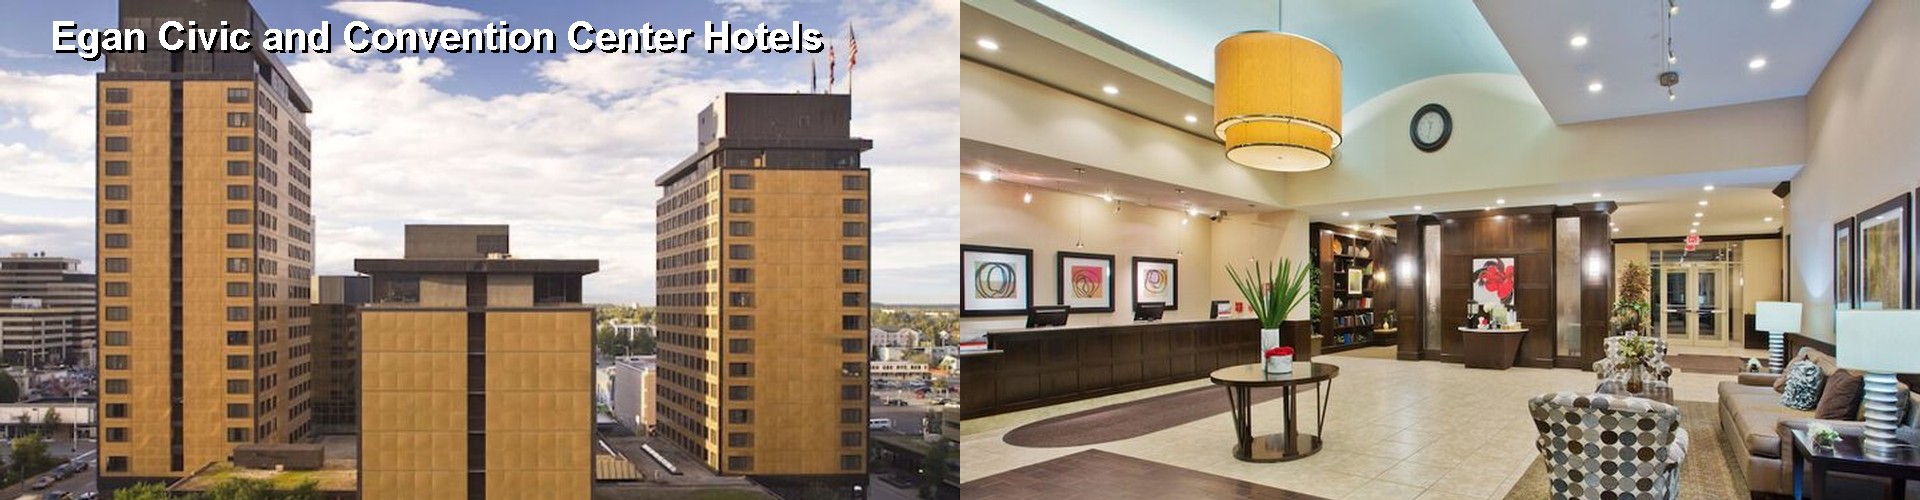 5 Best Hotels near Egan Civic and Convention Center